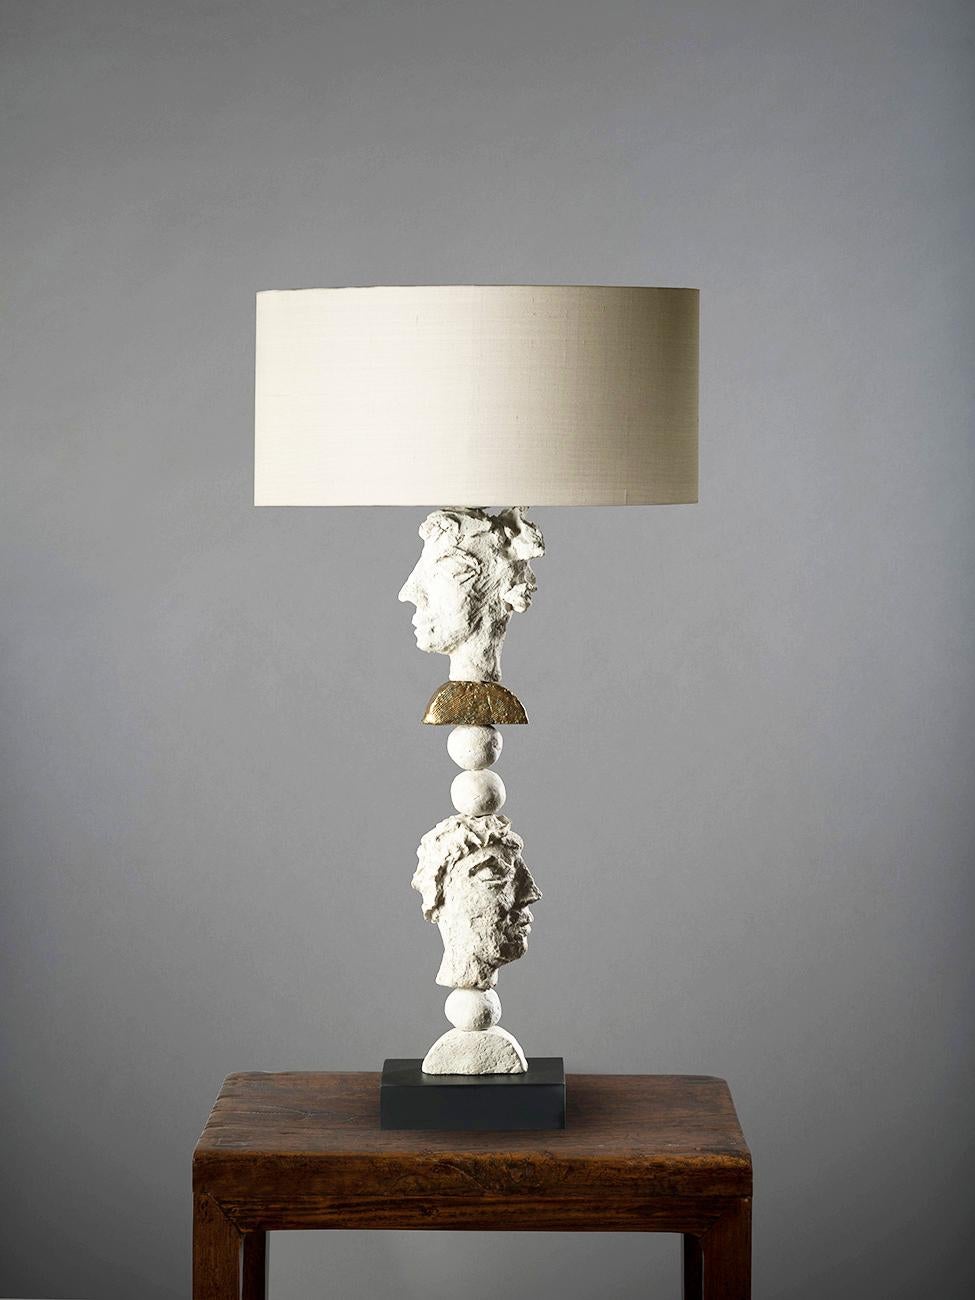 This contemporary Margit Wittig table lamp sits on a rectangular slate base and features multiple white resin handcrafted spheres and semi-circles with organic surface textures. A single central semicircle is enveloped in 24-karat gold leaf, done by